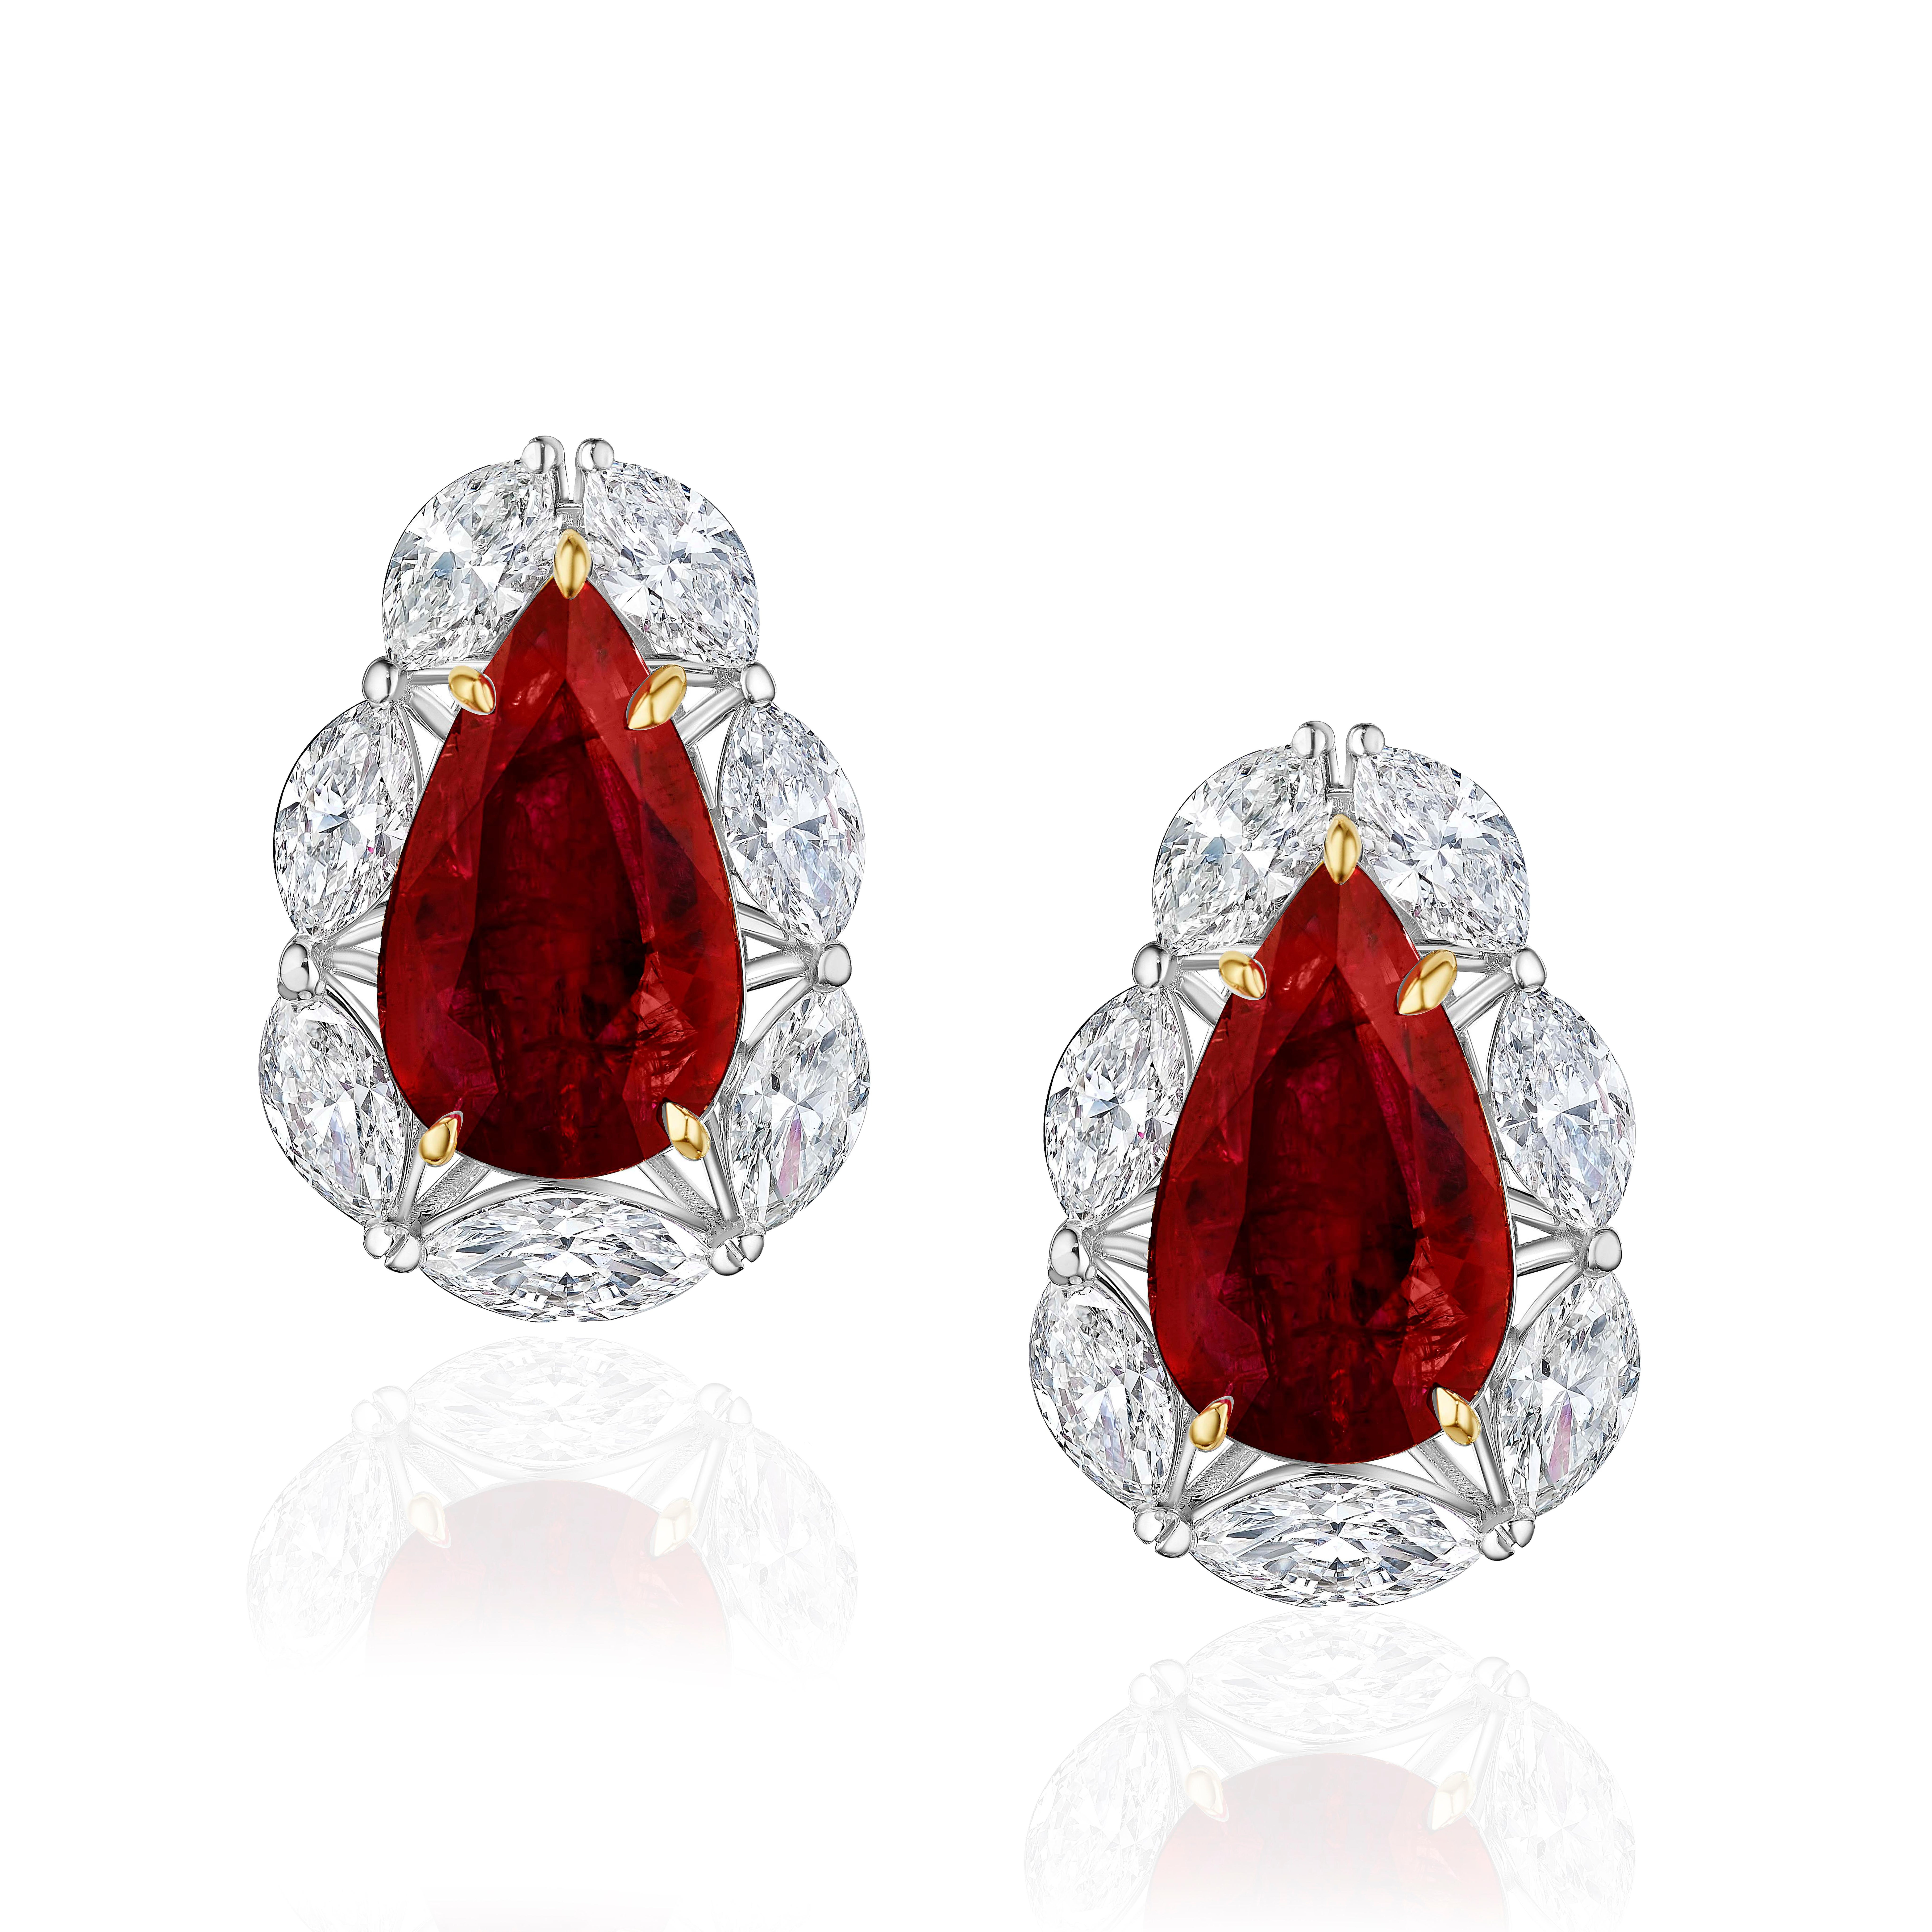 Pear shaped Rubies weighing 9.12 Carats. GIA Certified.
Surrounded by Marquise shaped Diamonds weighing 4.28 Carats. Graded D-F color, SI clarity. Each certified by GIA.
Will come in a booklet with 16 GIA Certificates.
Set in Platinum and 18 Karat